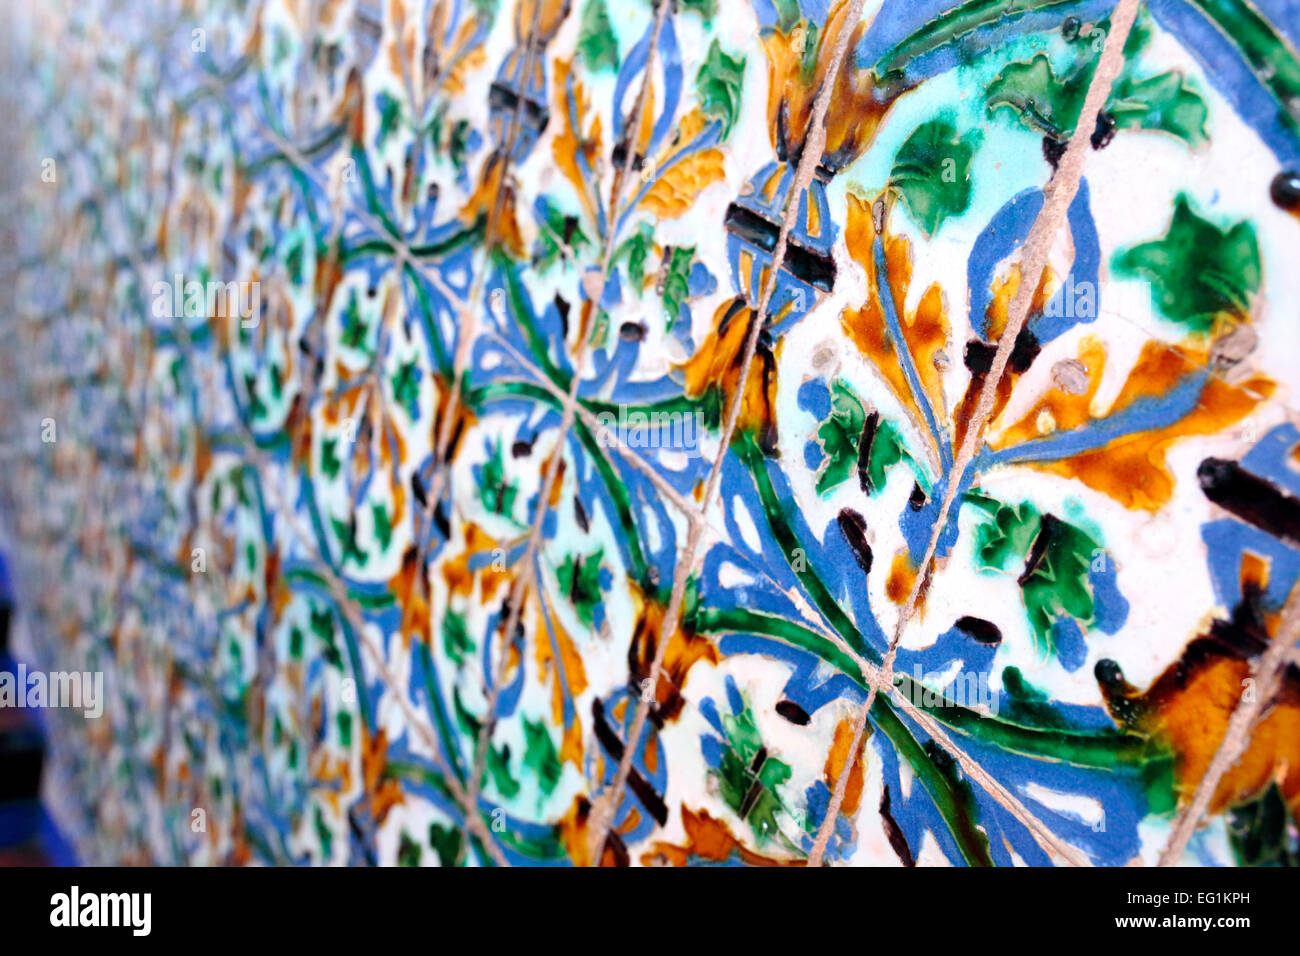 Azulejo ornament on the wall, Alcazar, royal palace, Seville, Andalusia, Spain Stock Photo